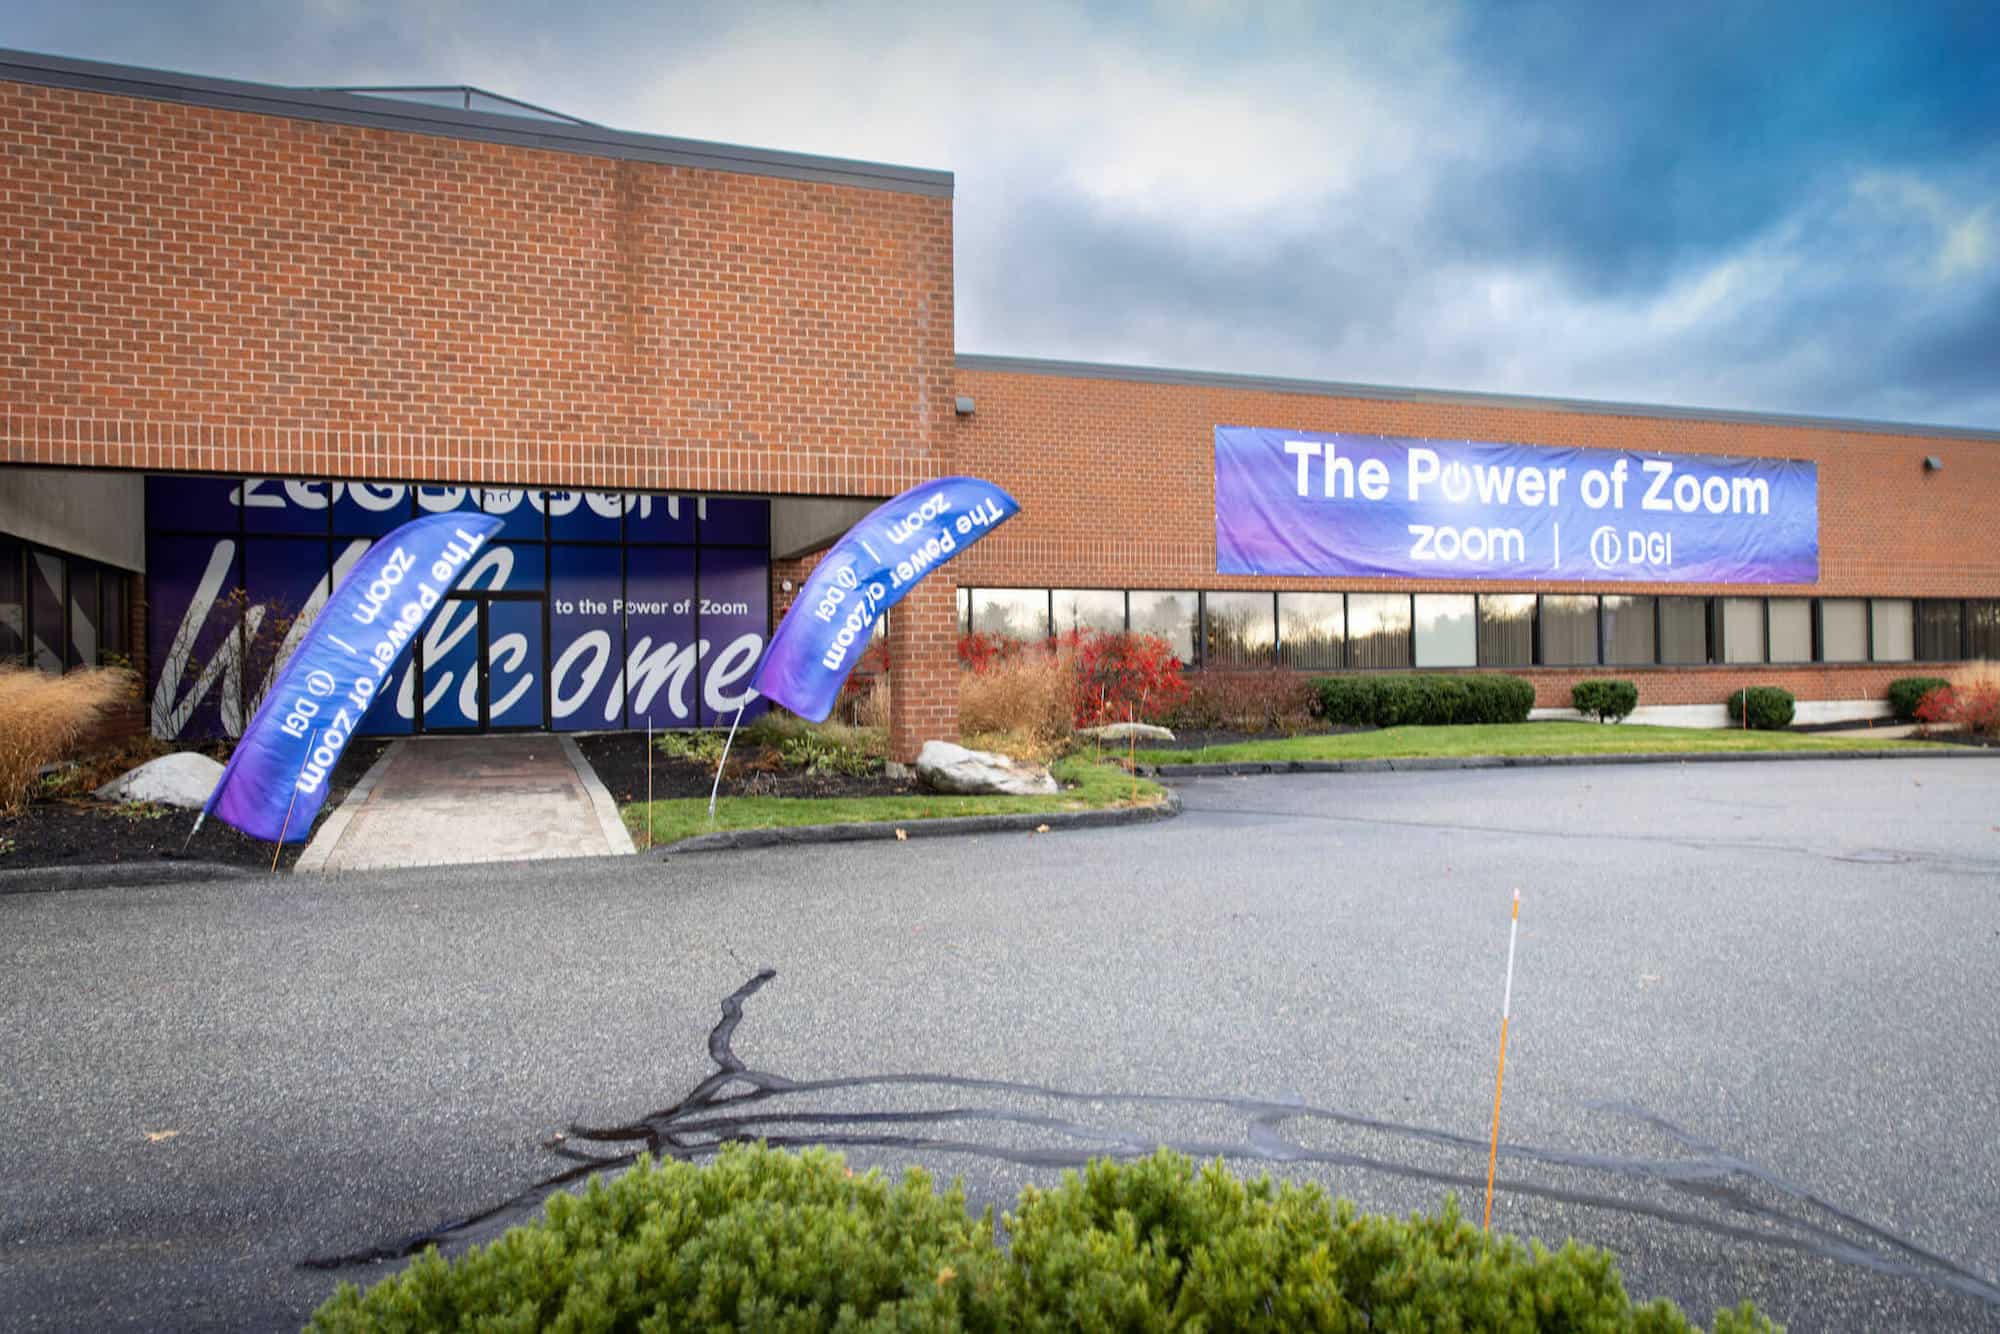 A brick building front featuring trade show signage. Blue banners with white writing are set up on the building, its entrance and in the lawn on either side of the walkway leading up to the front doors.